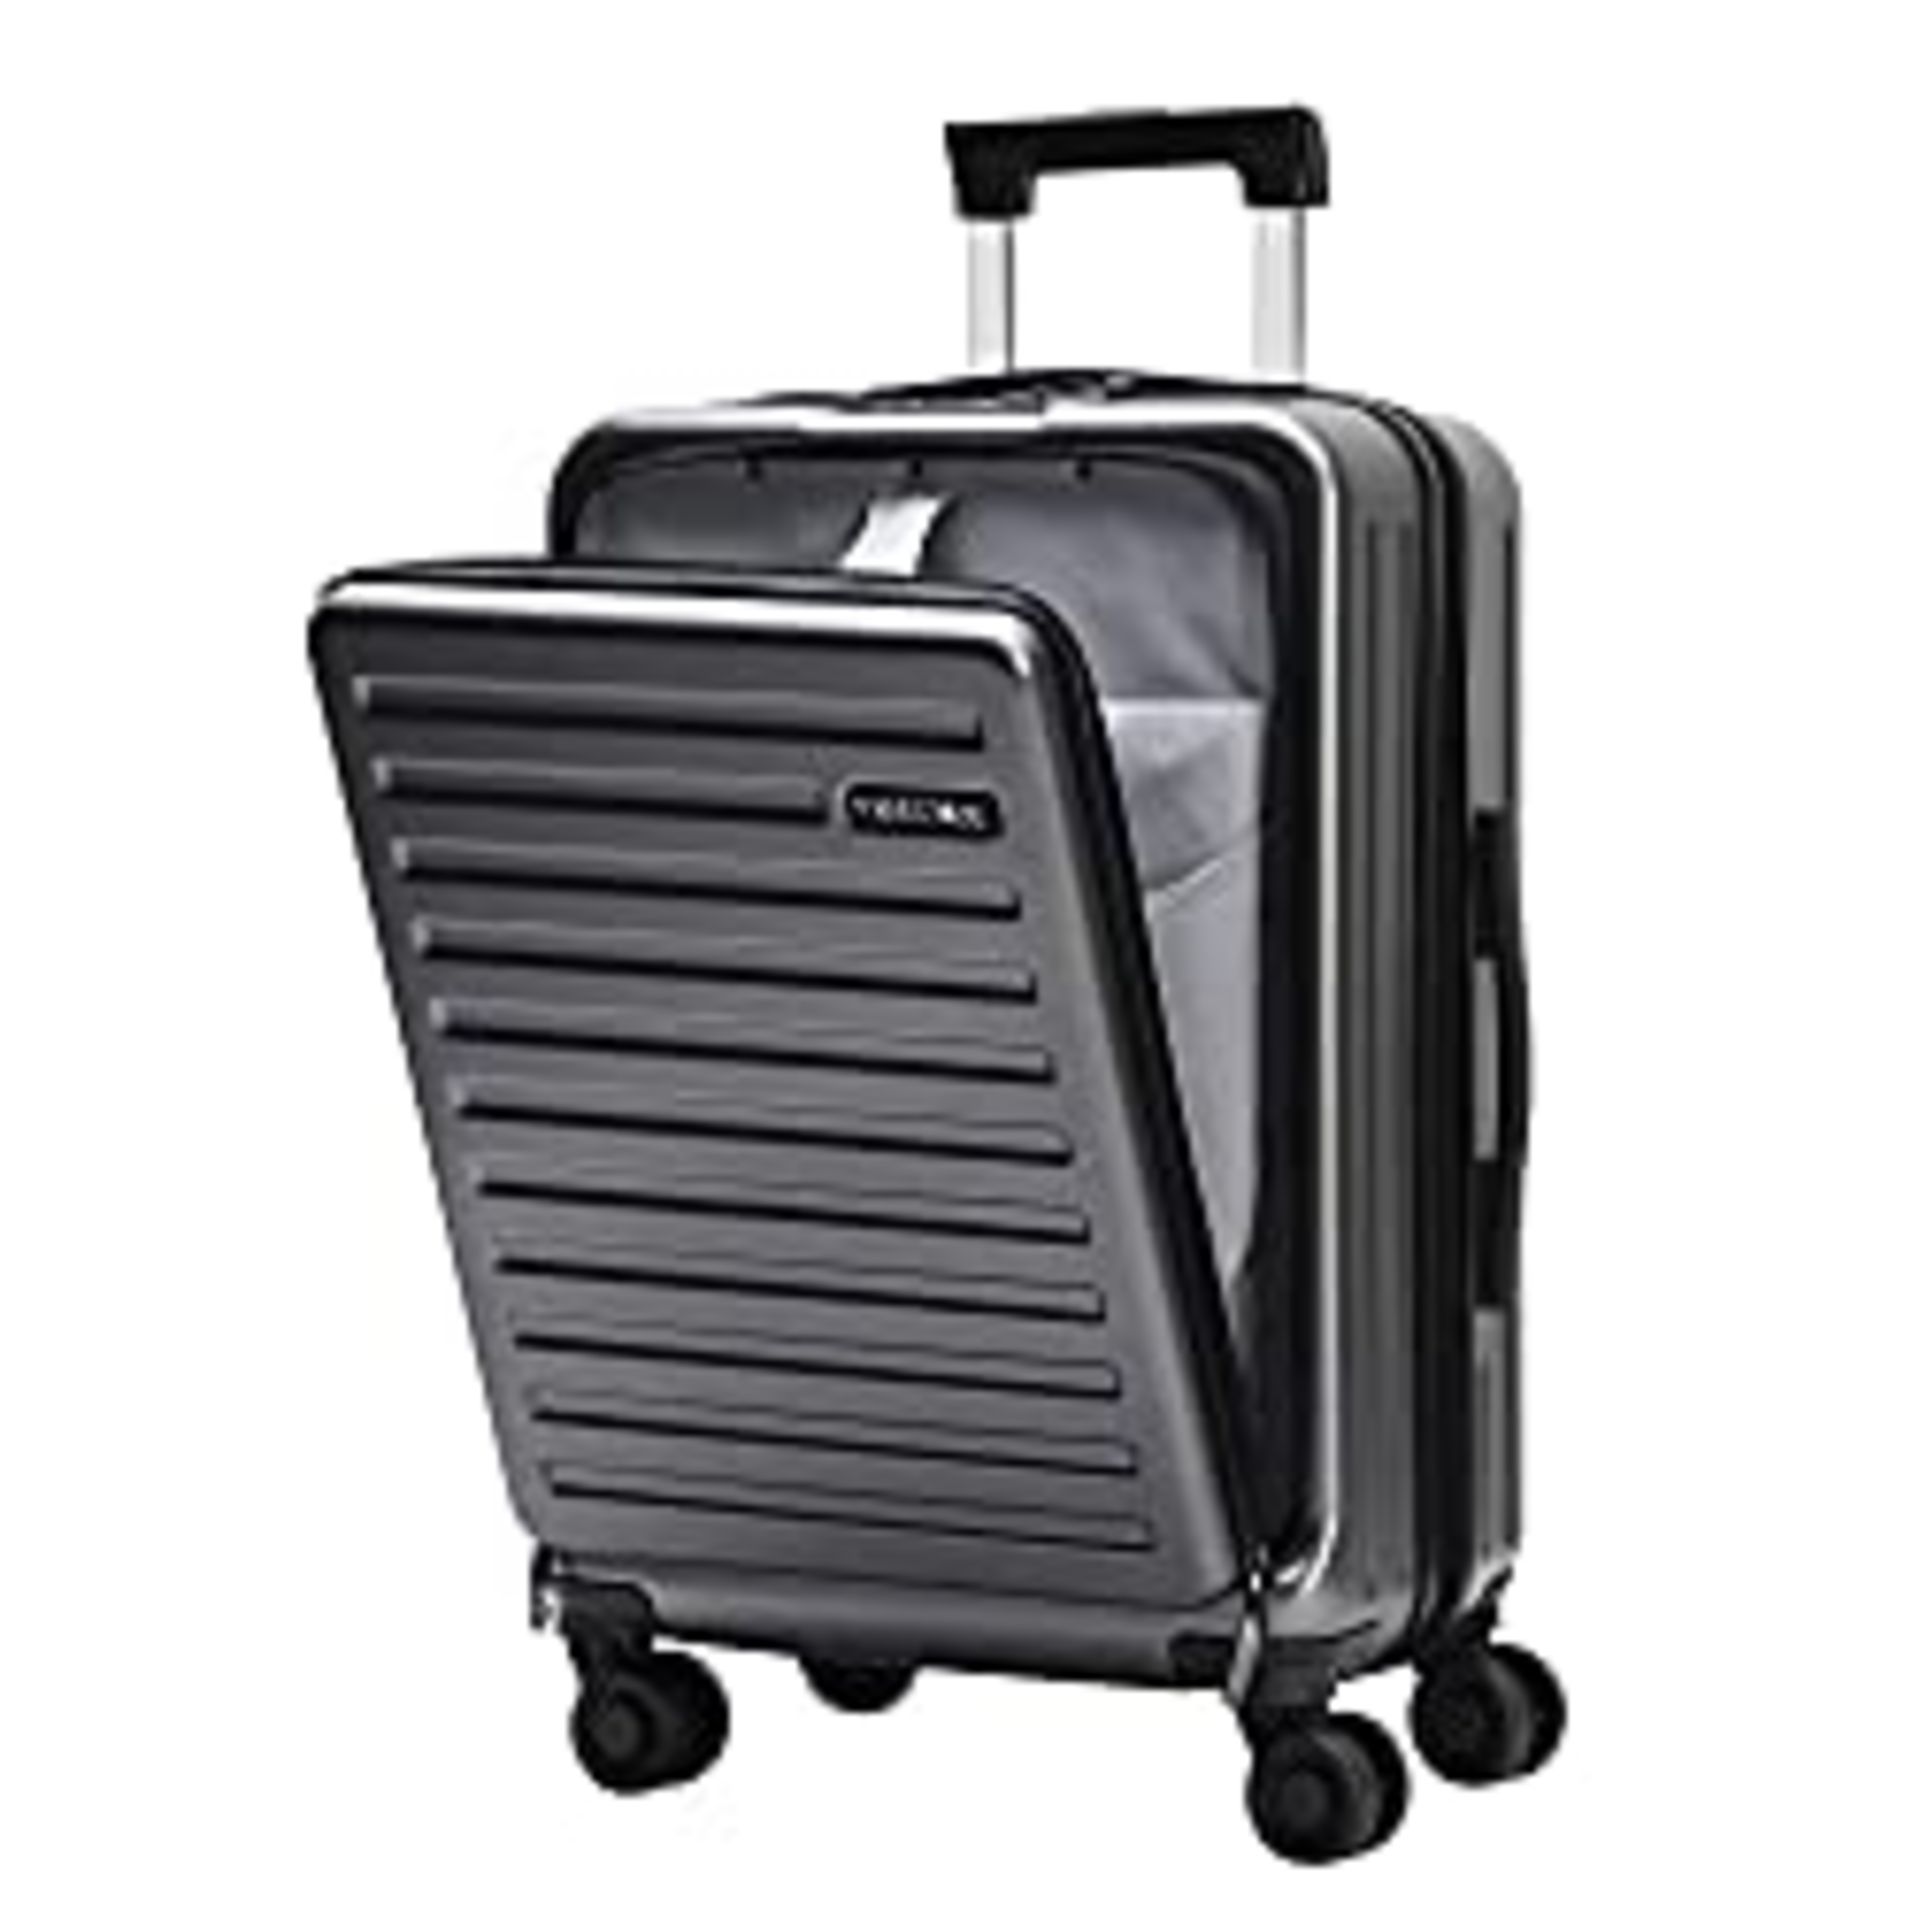 RRP £100.49 TydeCkare 20 Inch Carrry On Luggage with Front Zipper Pocket